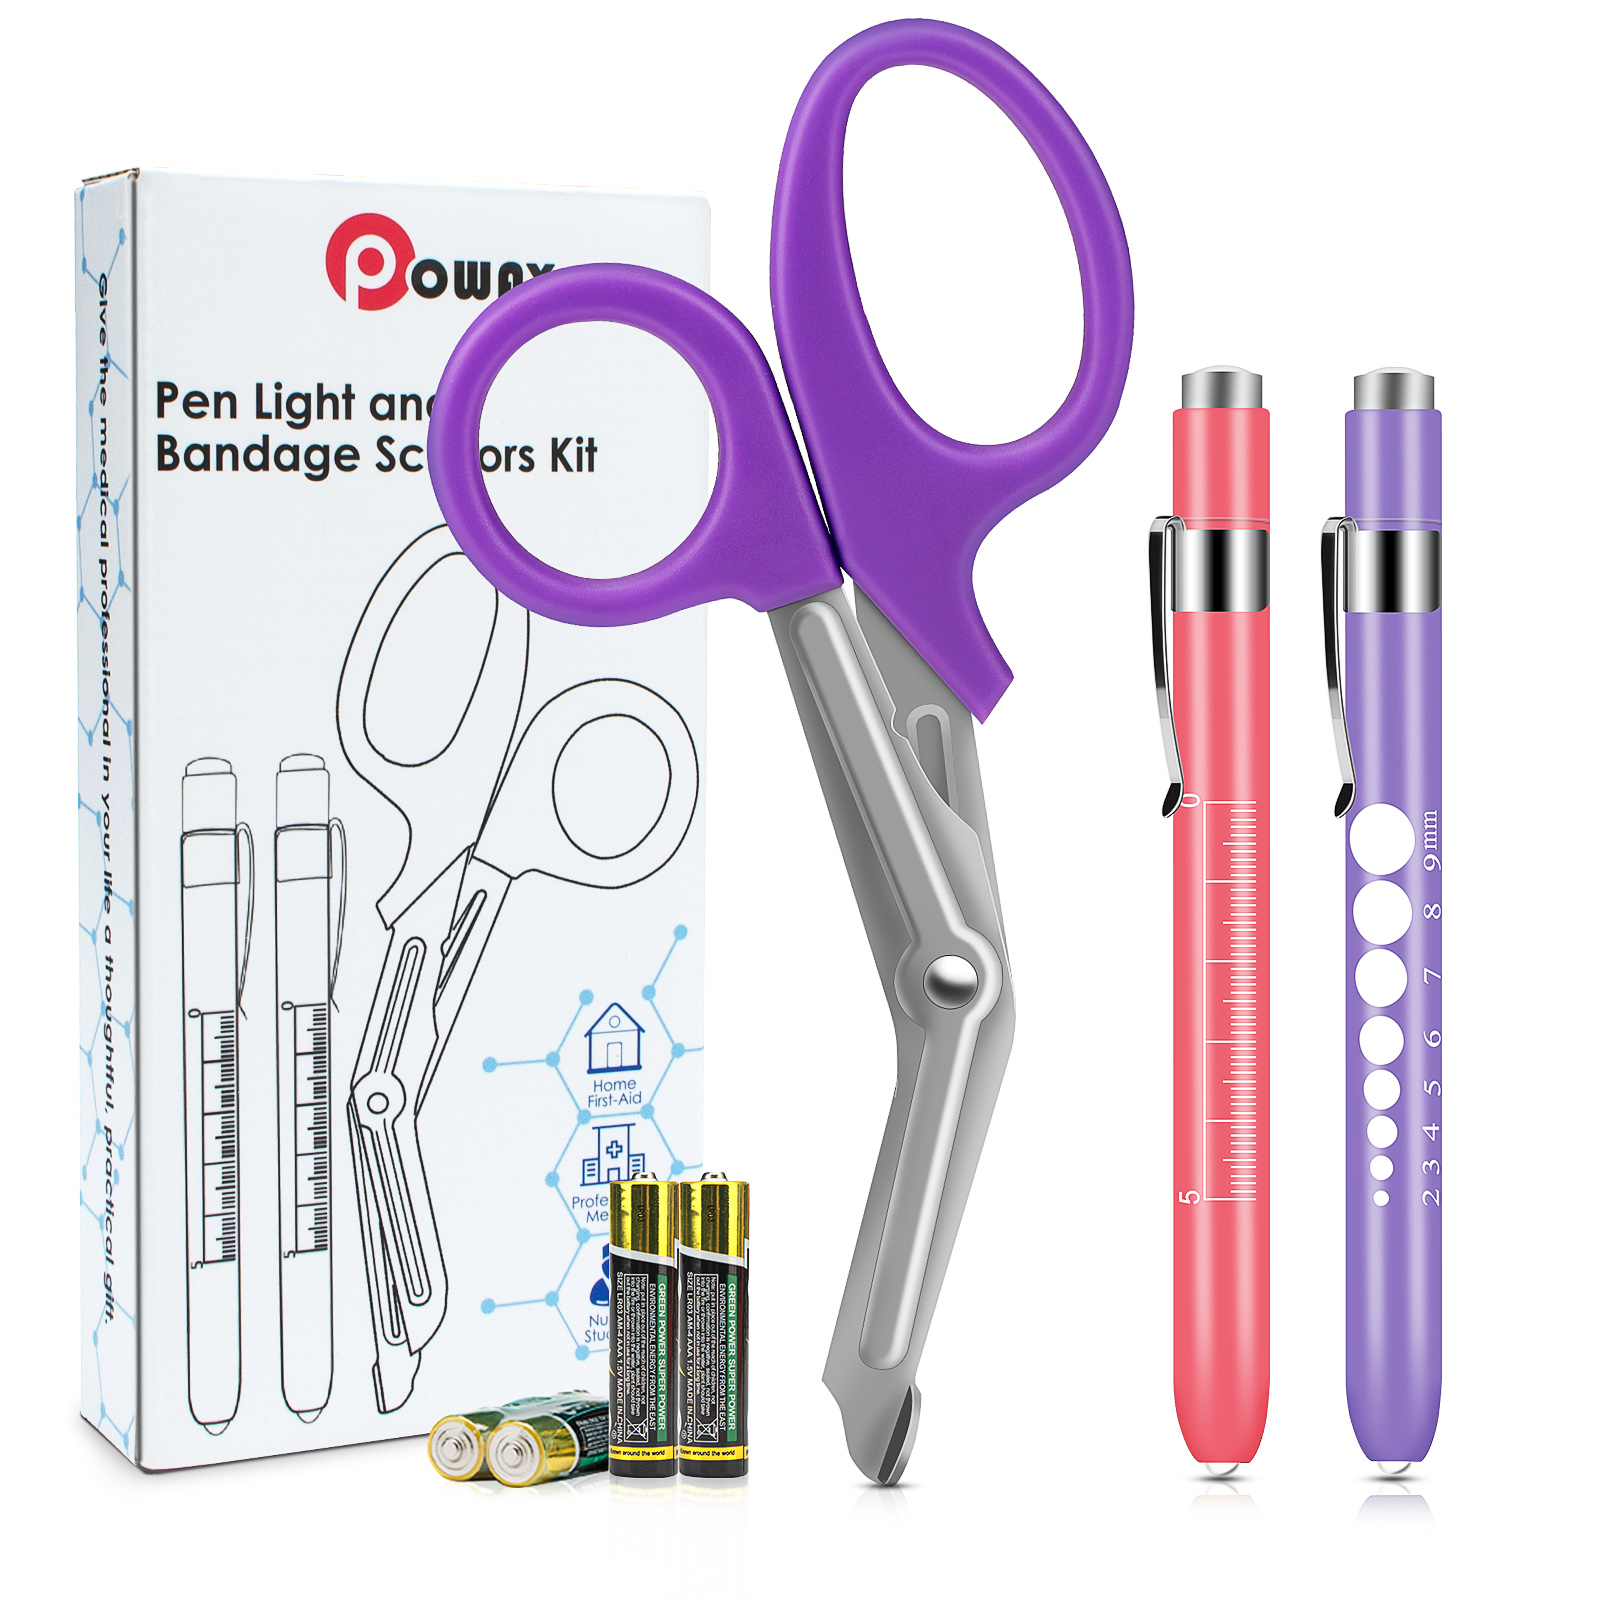 OPOWAY Medical Pen Light and Purple Bandage Scissors 3 Pack, Two Reusable LED Pupil Penlight, with Free Batteries